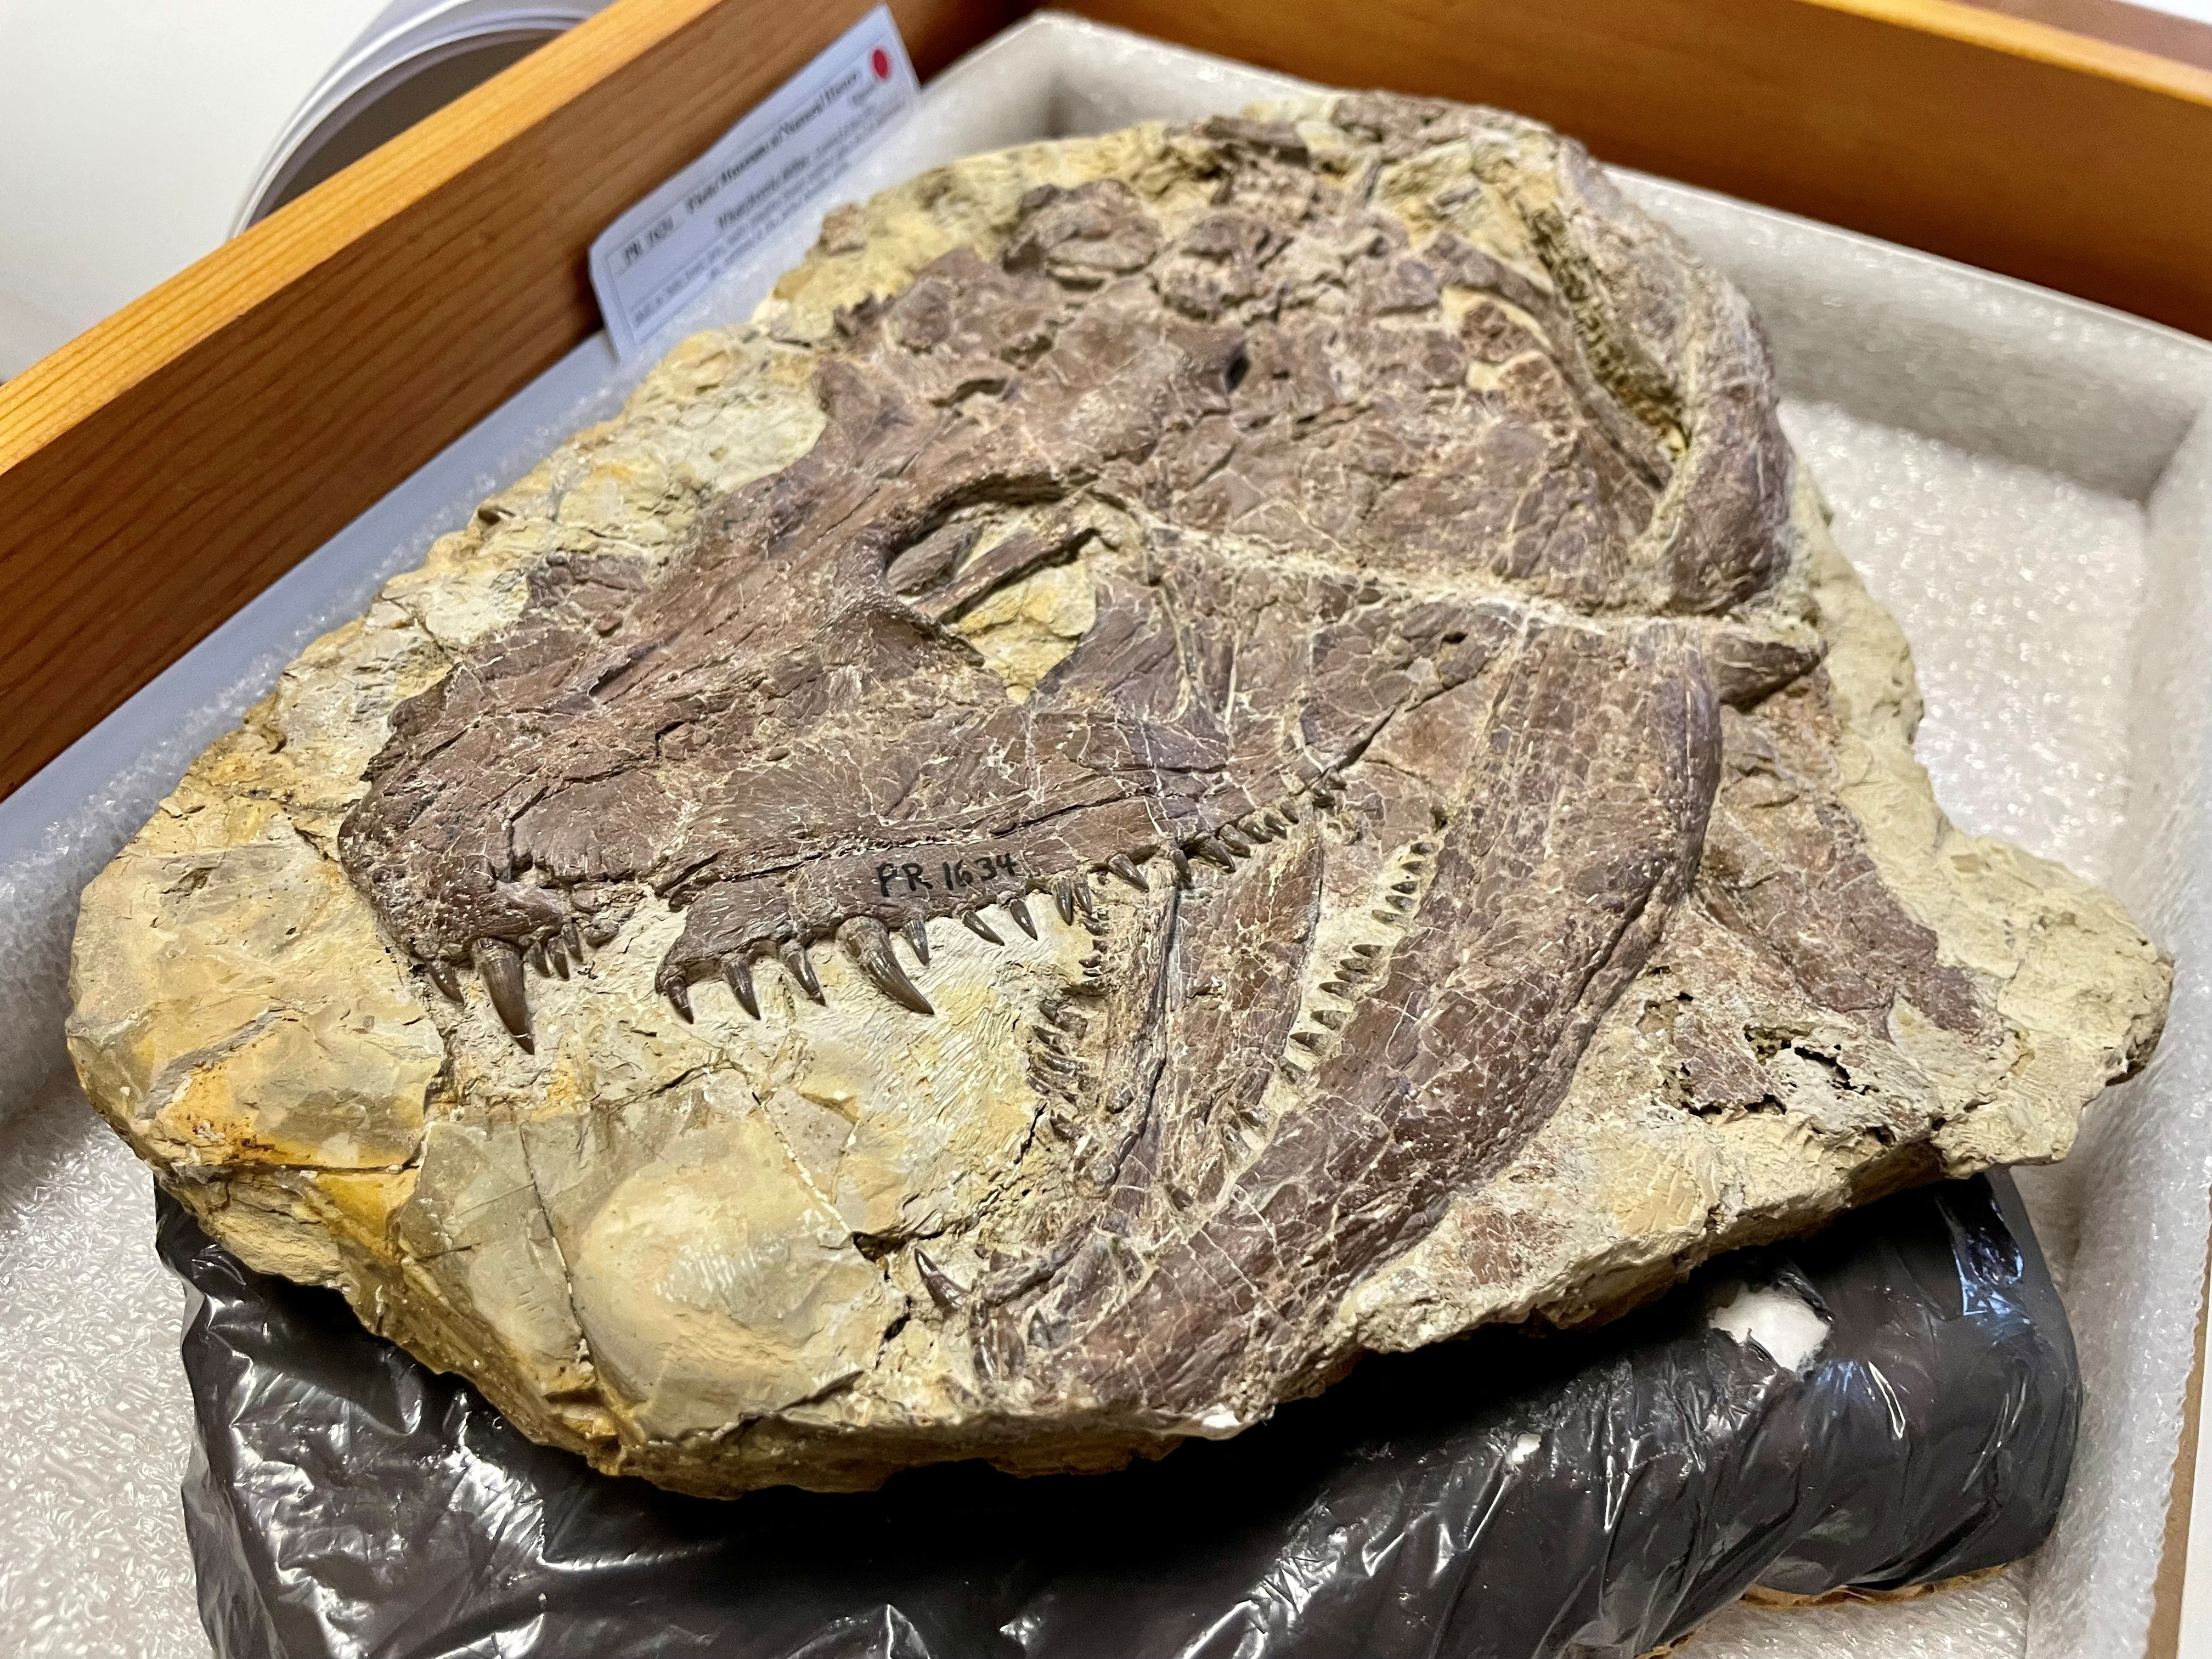 The skull of the large early tetrapod and apex predator Whatcheeria